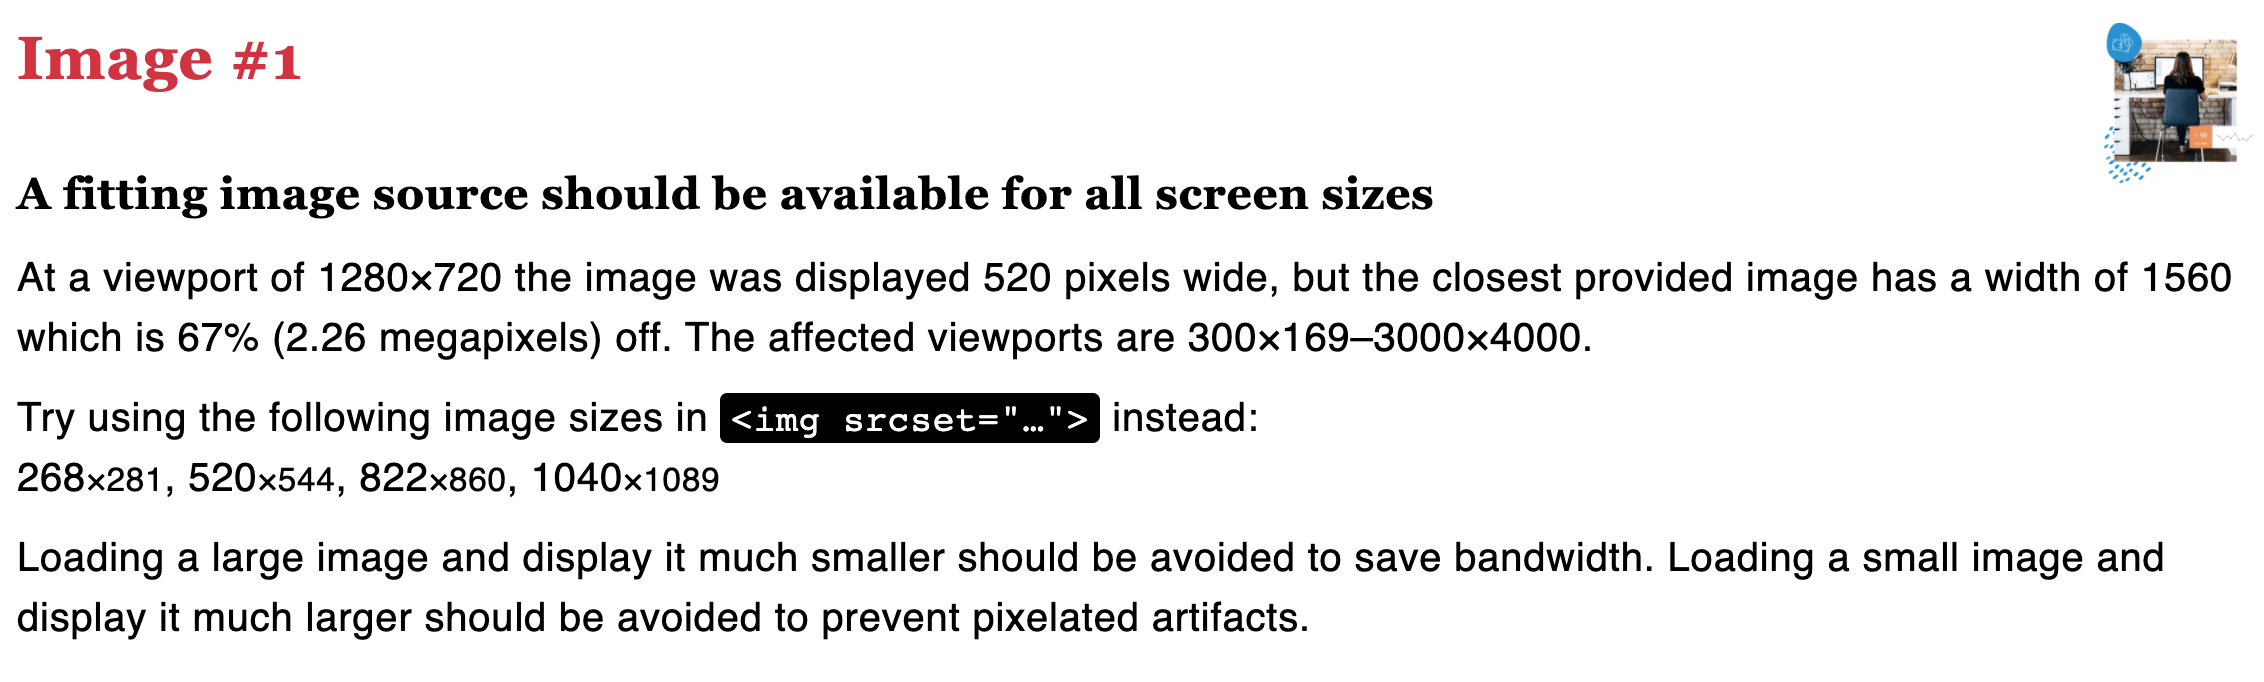 Screenshot of 'srcset' attribute suggestions from RespImageLint.